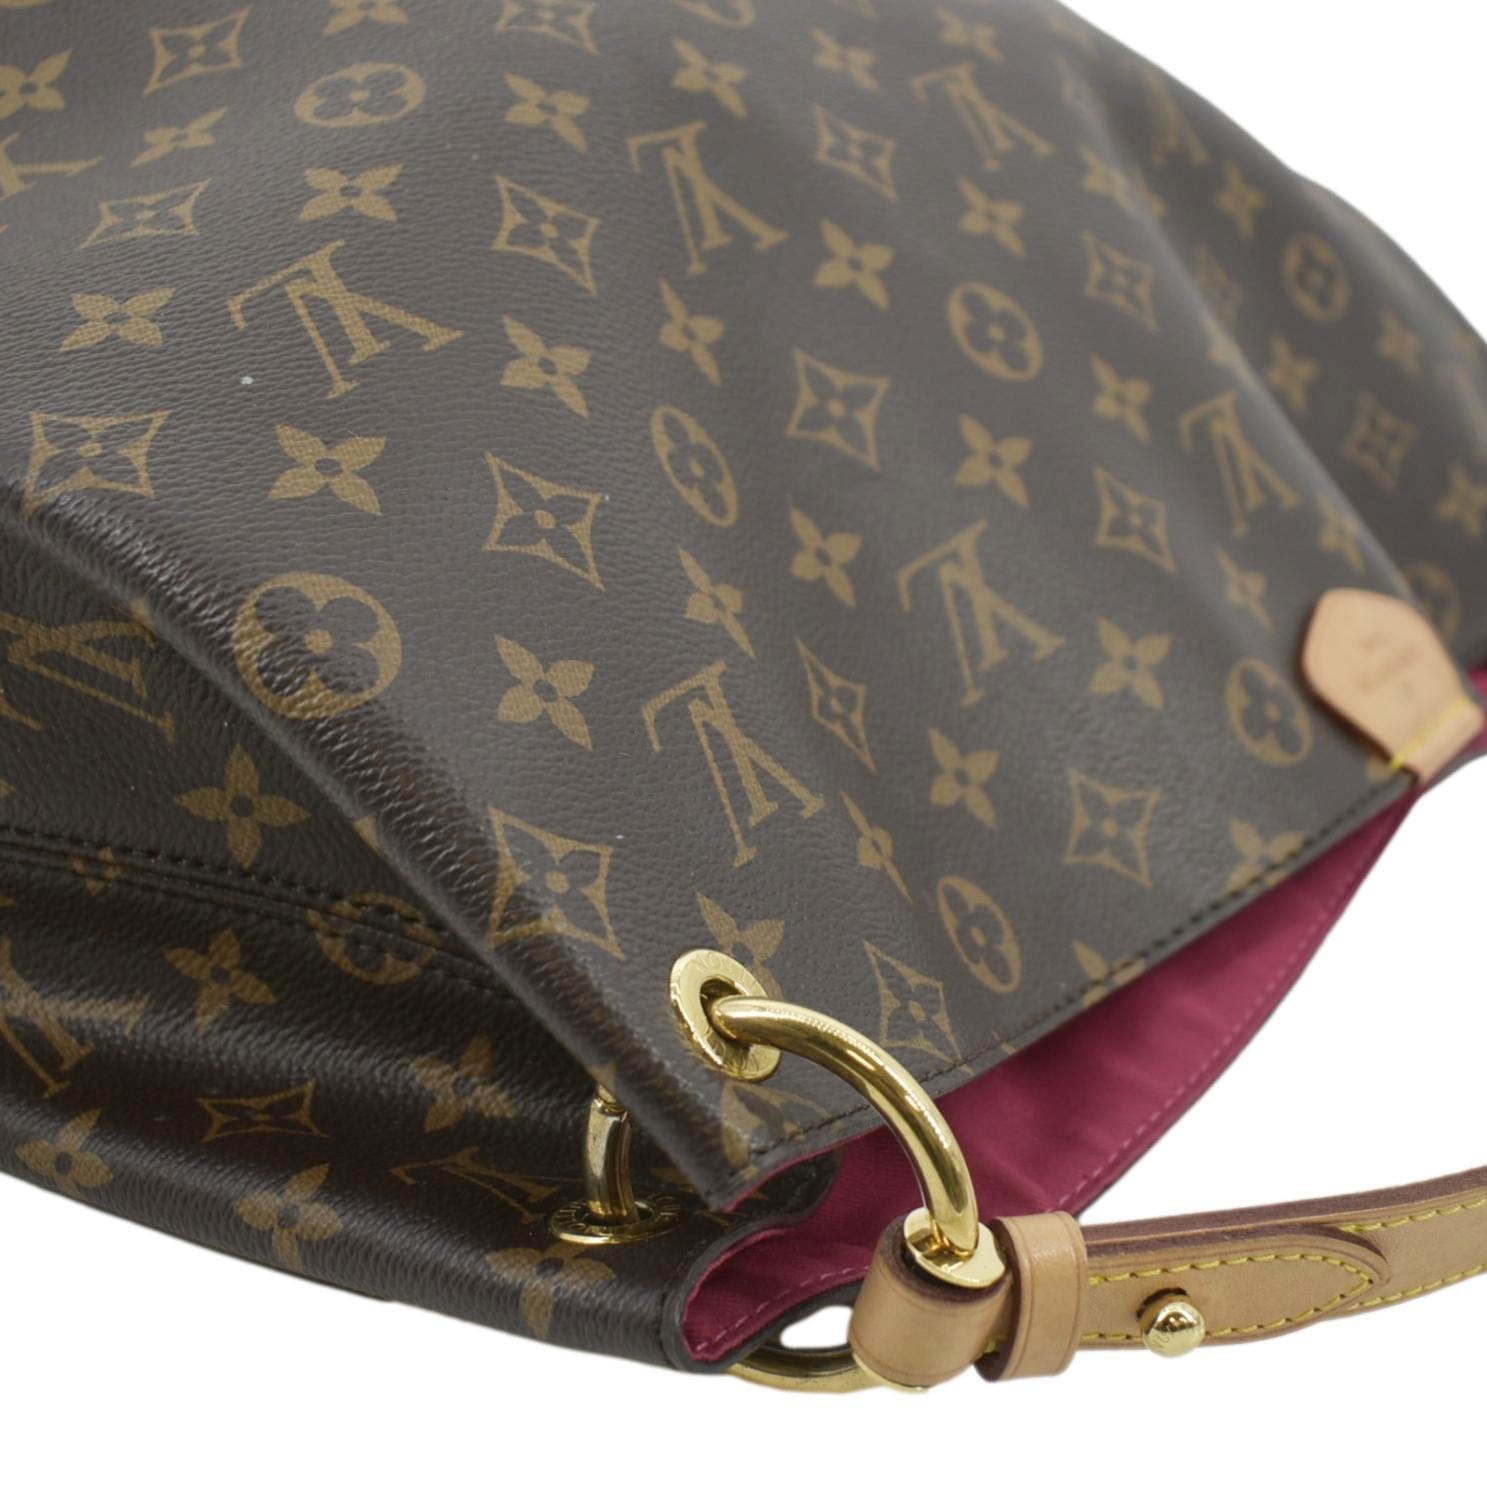 The Louis Vuitton Graceful bag is a bag that is perfect for daily use.